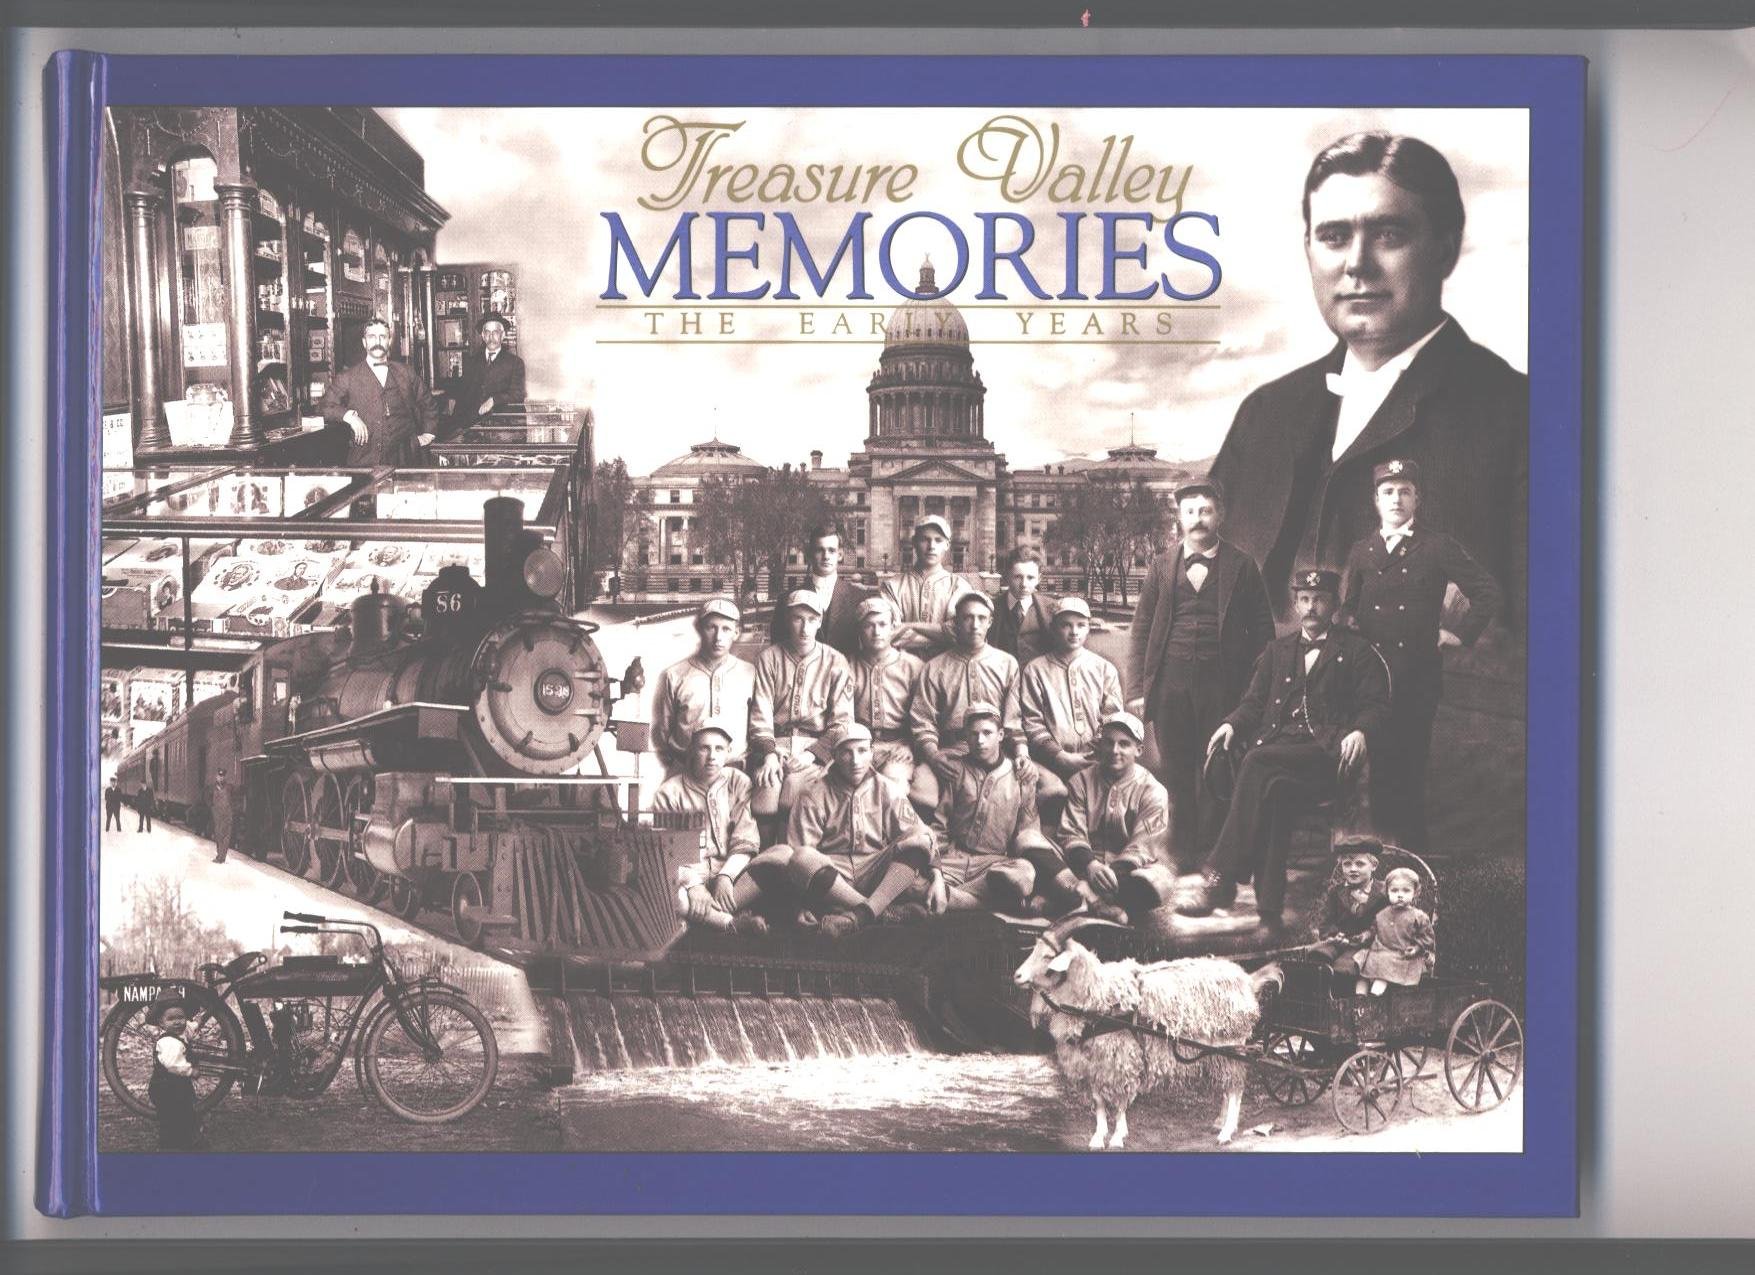 Treasure Valley memories: The early years (book cover)